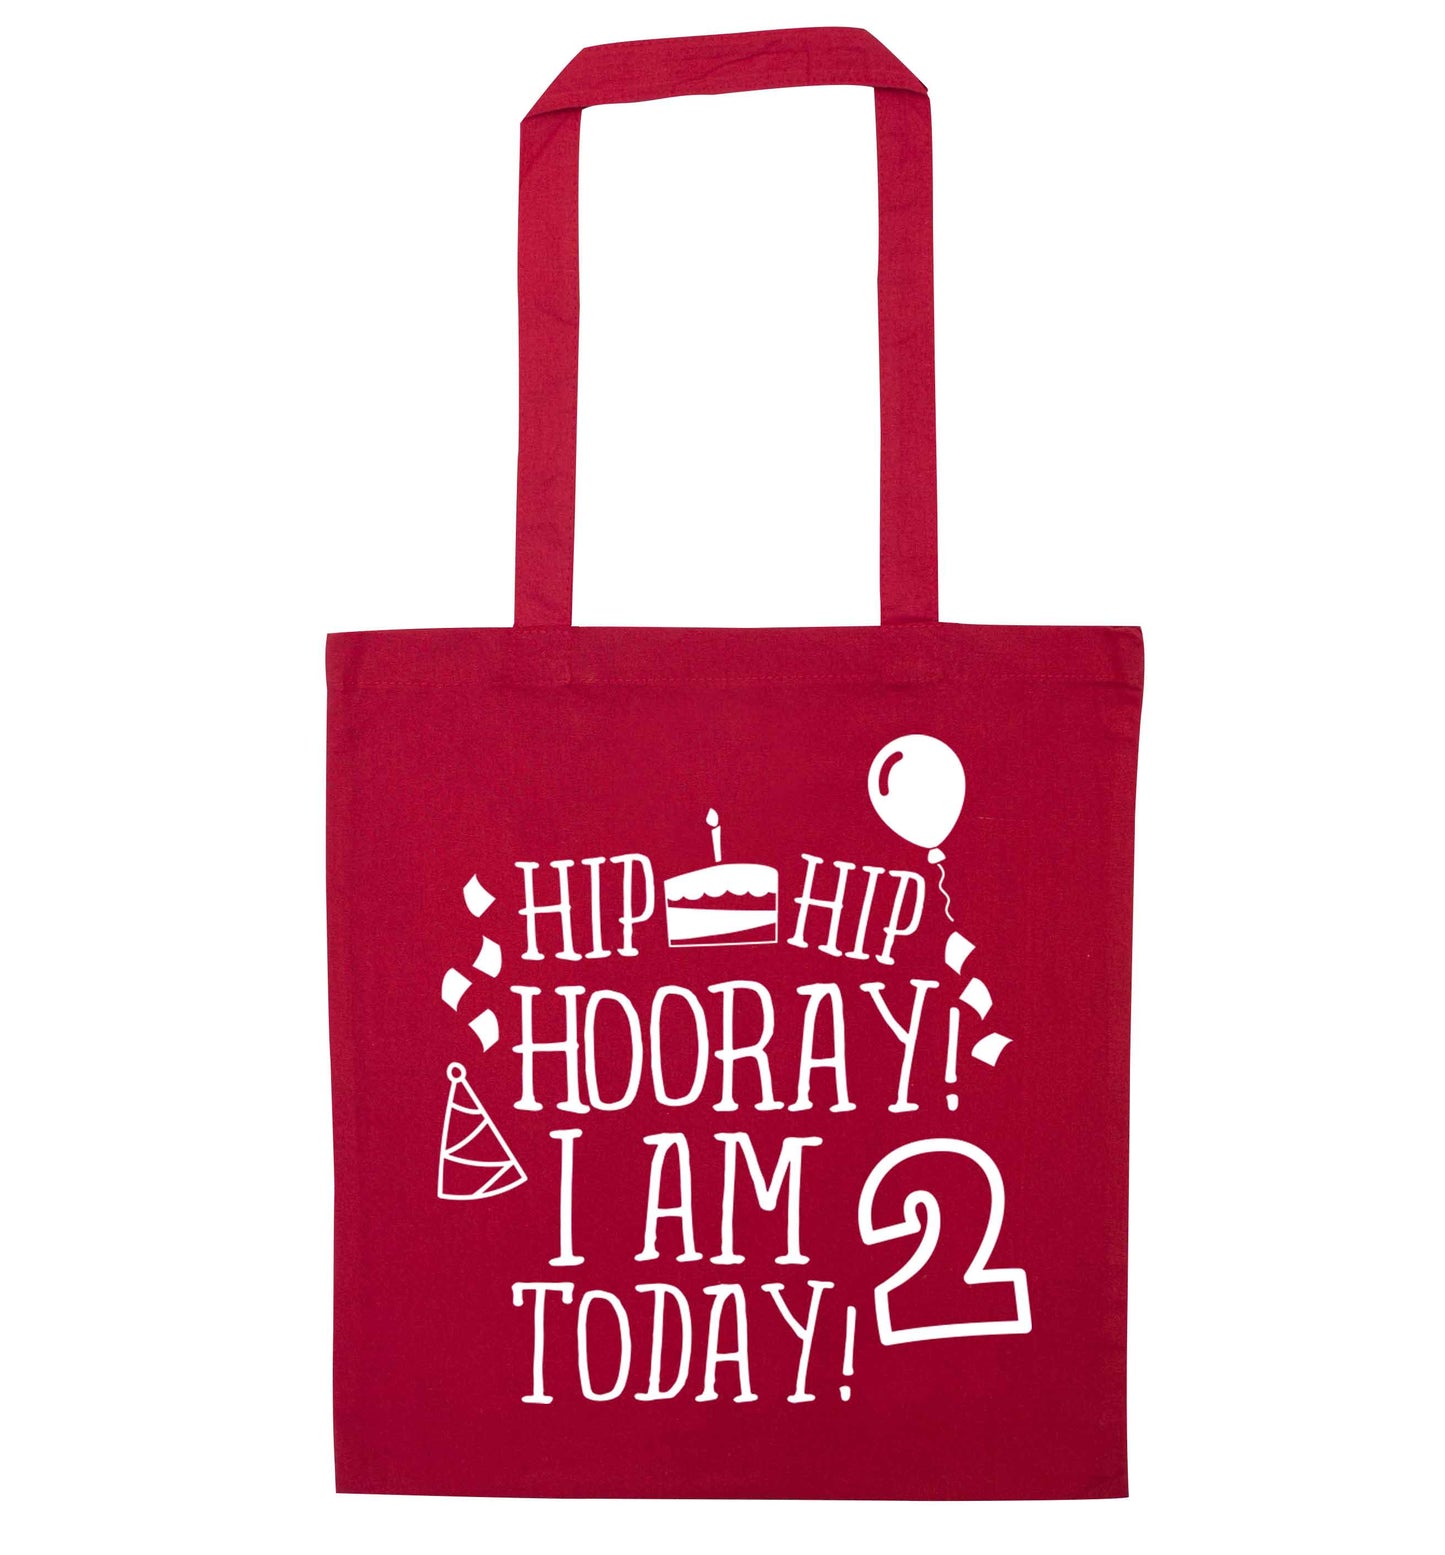 I'm 2 Today red tote bag